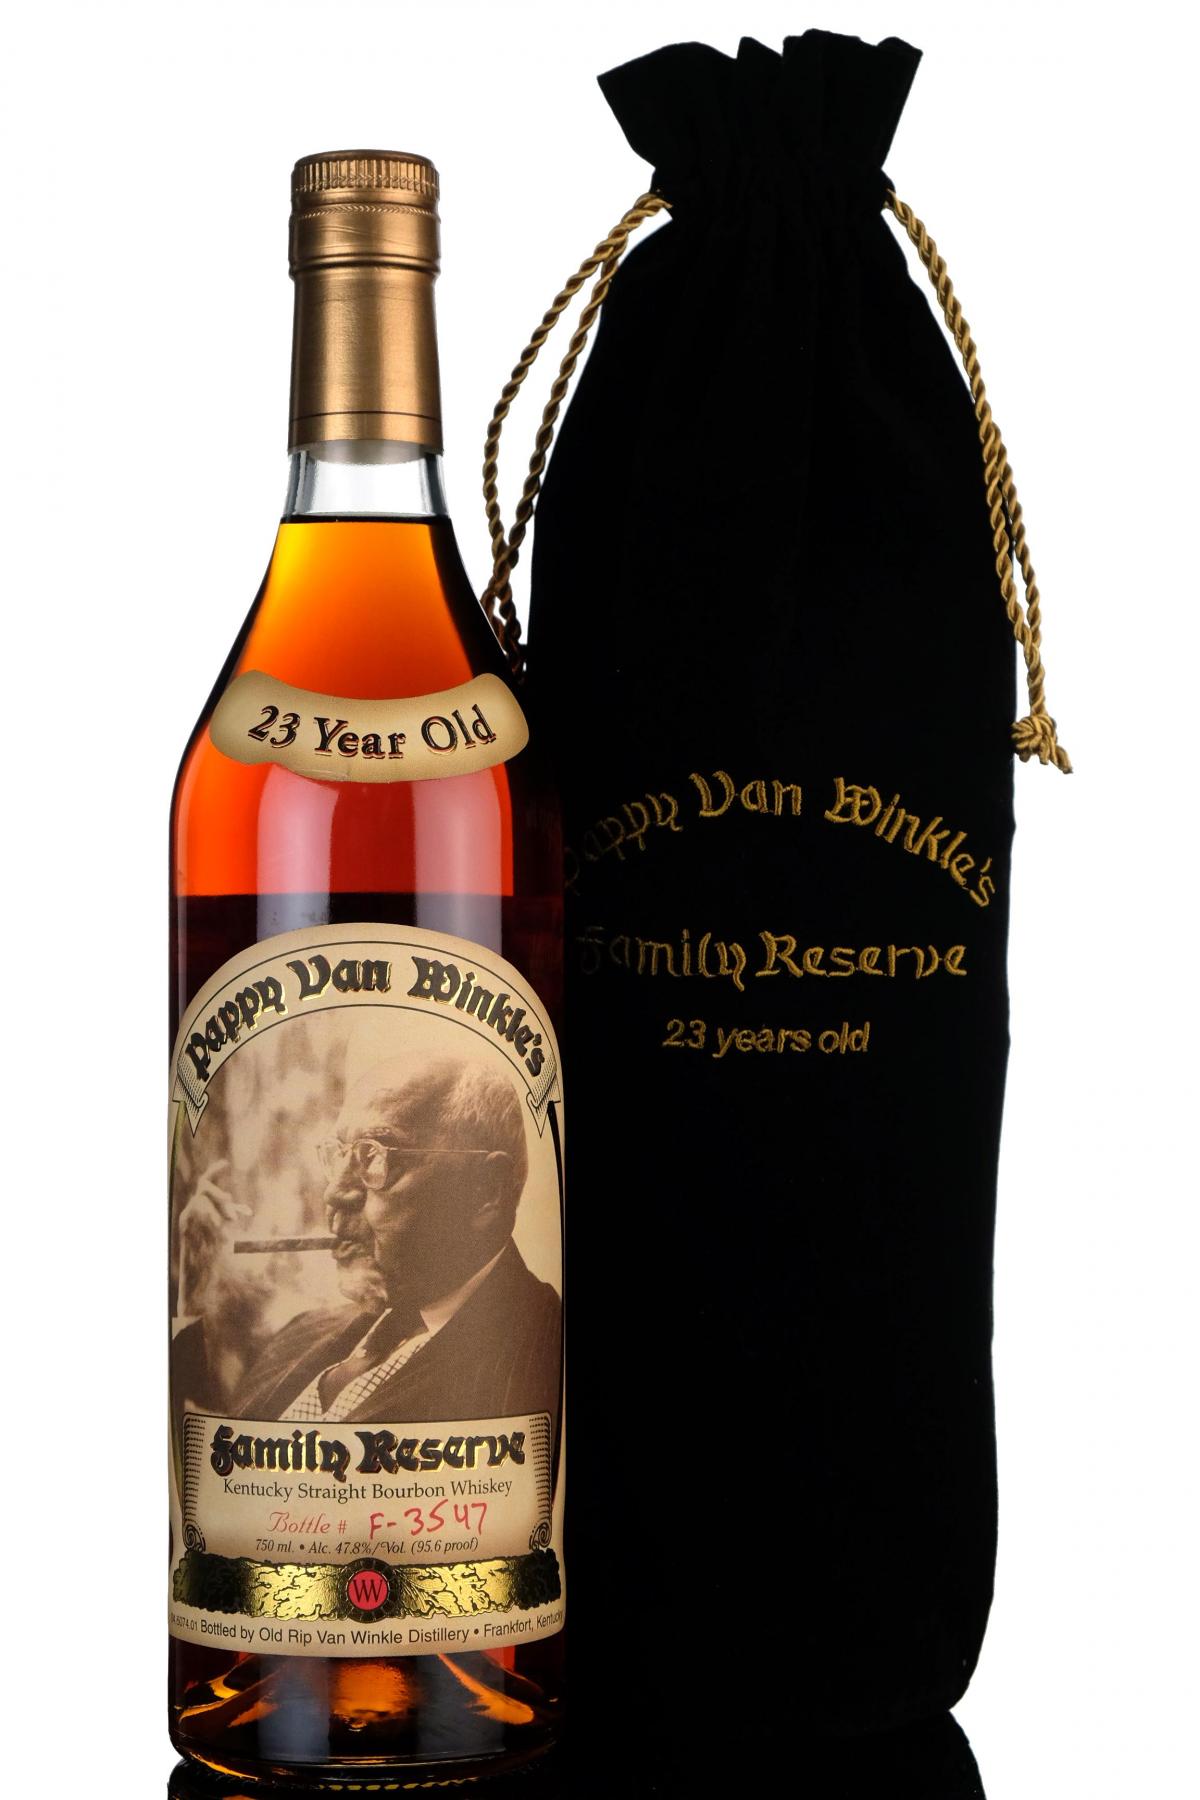 Pappy Van Winkles Family Reserve - 23 Year Old - Kentucky Straight Bourbon Whiskey